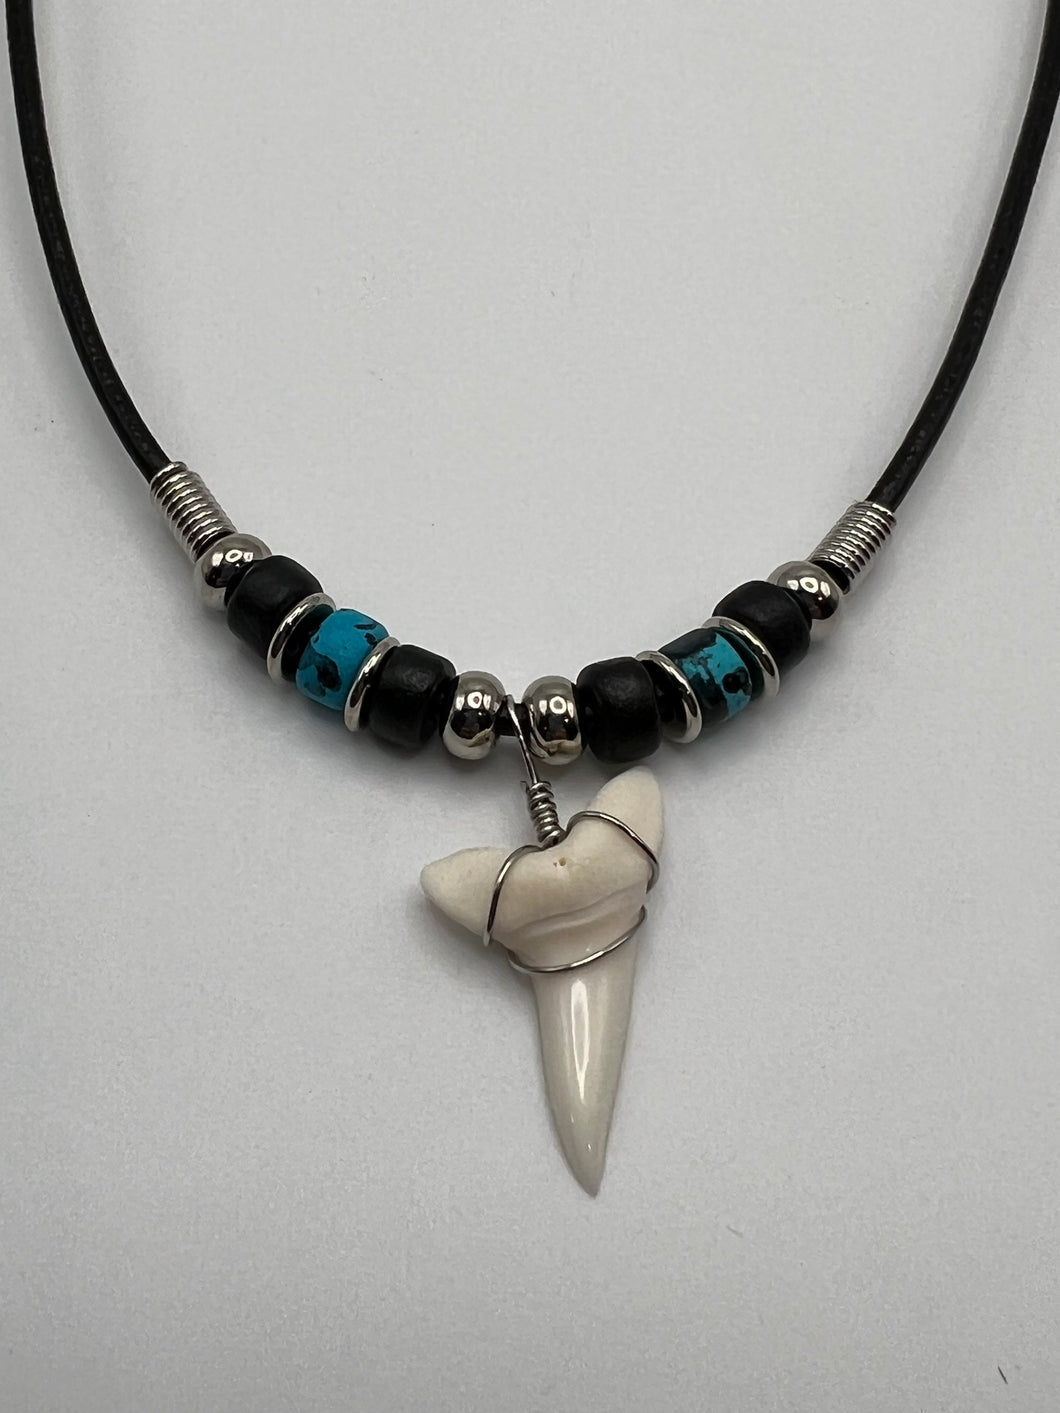 White Mako Shark Tooth Necklace Blue and Black Speckled Beads